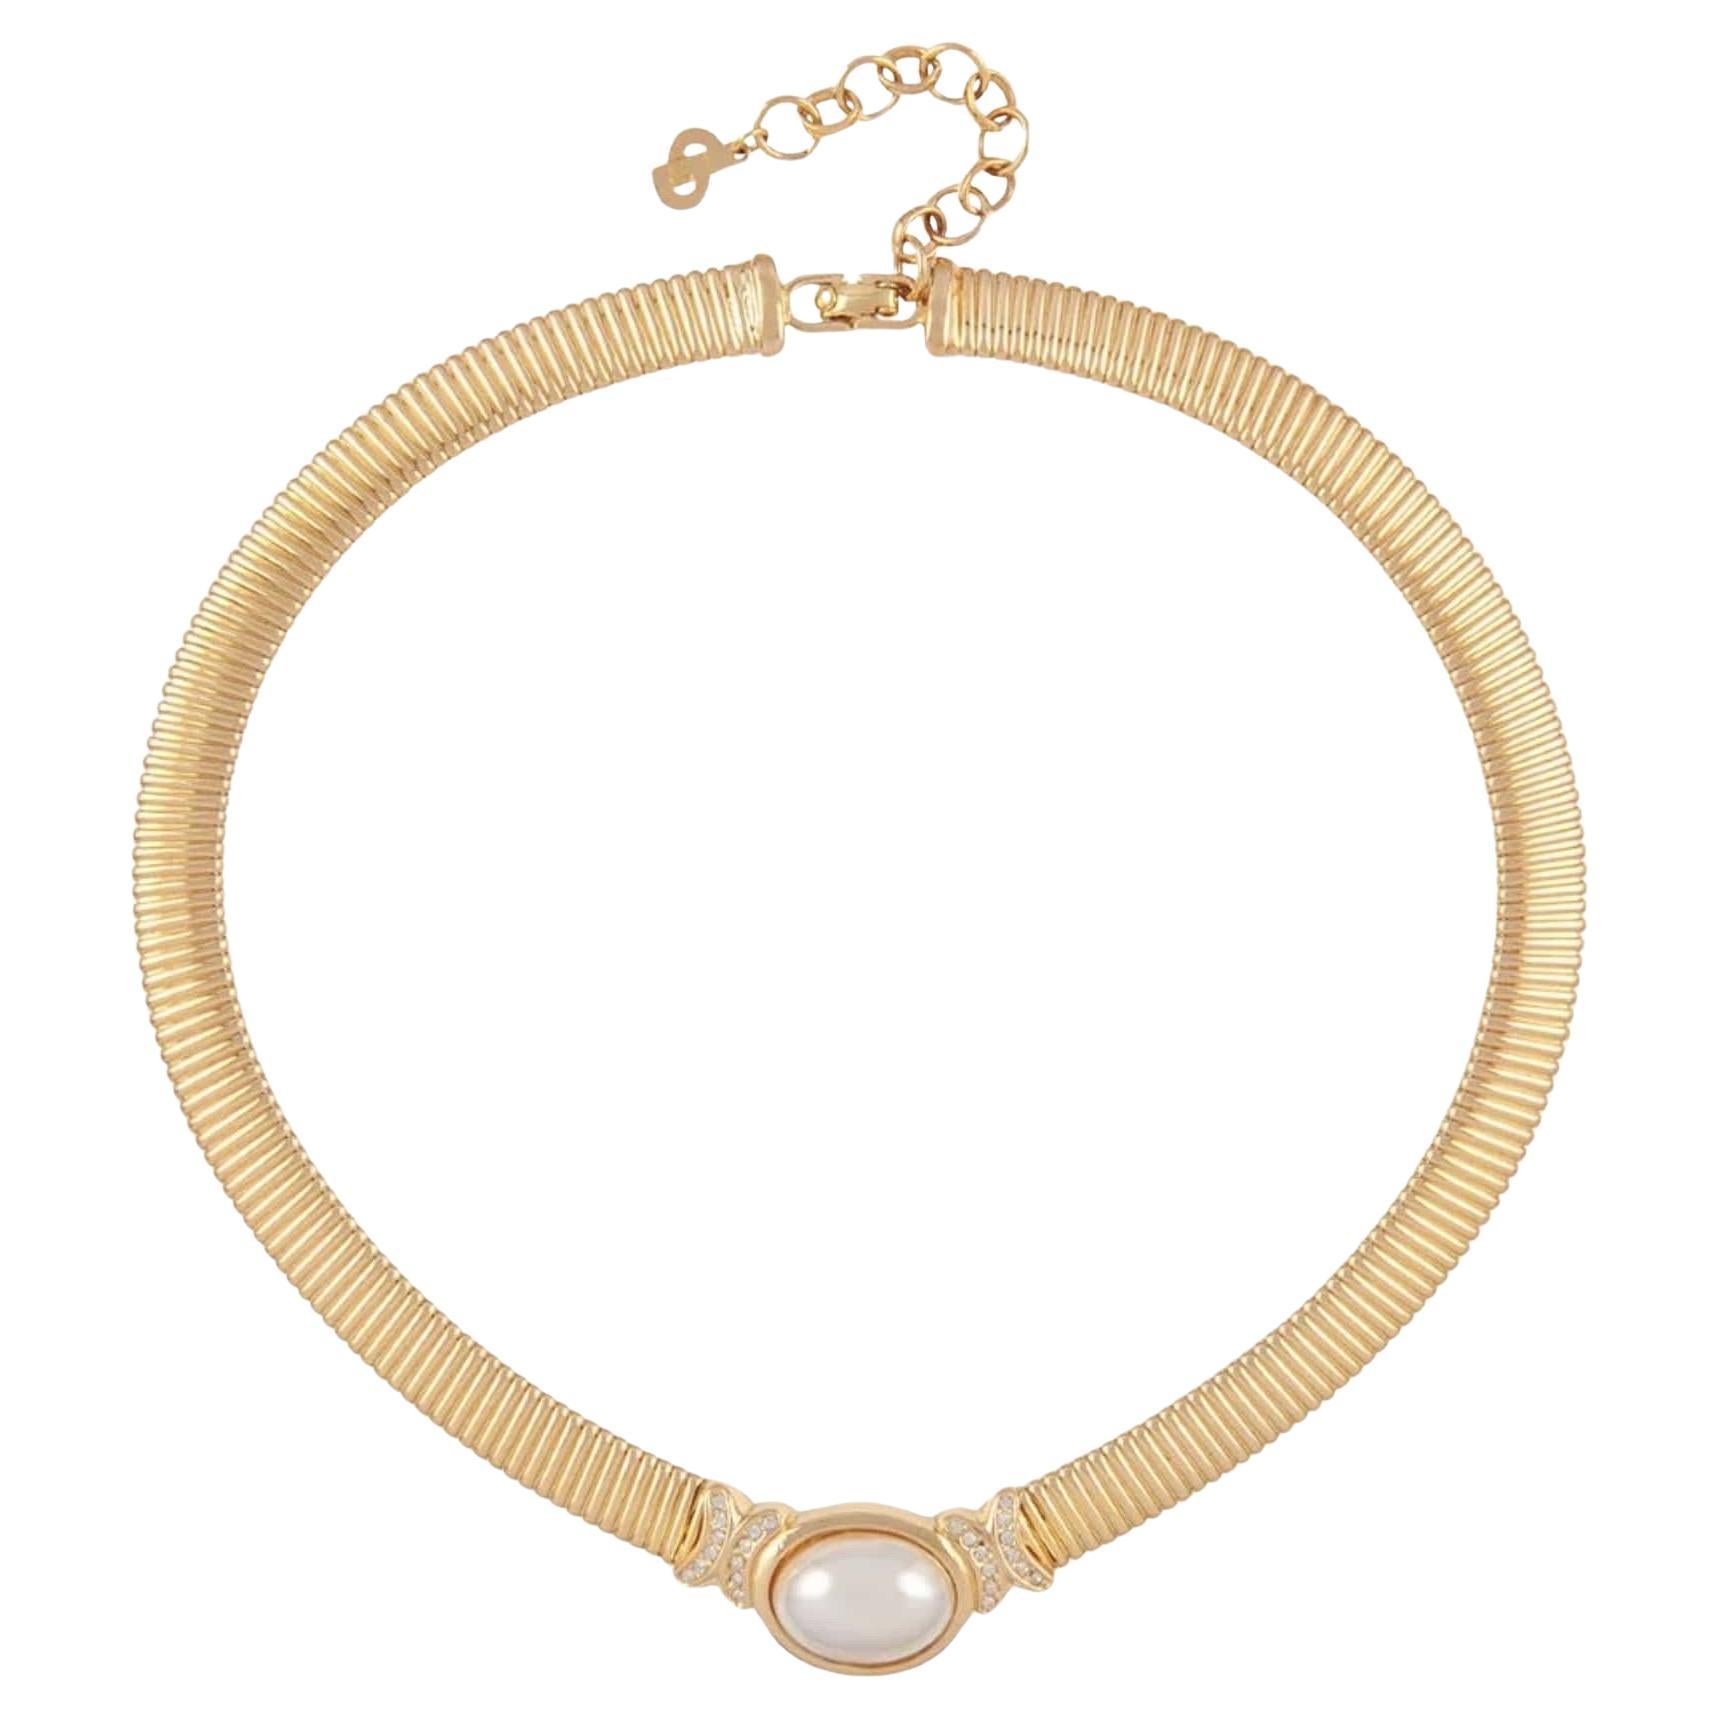 Christian Dior Vintage 1980s Omega Collar Oval Pearl Crystals Gold Necklace For Sale